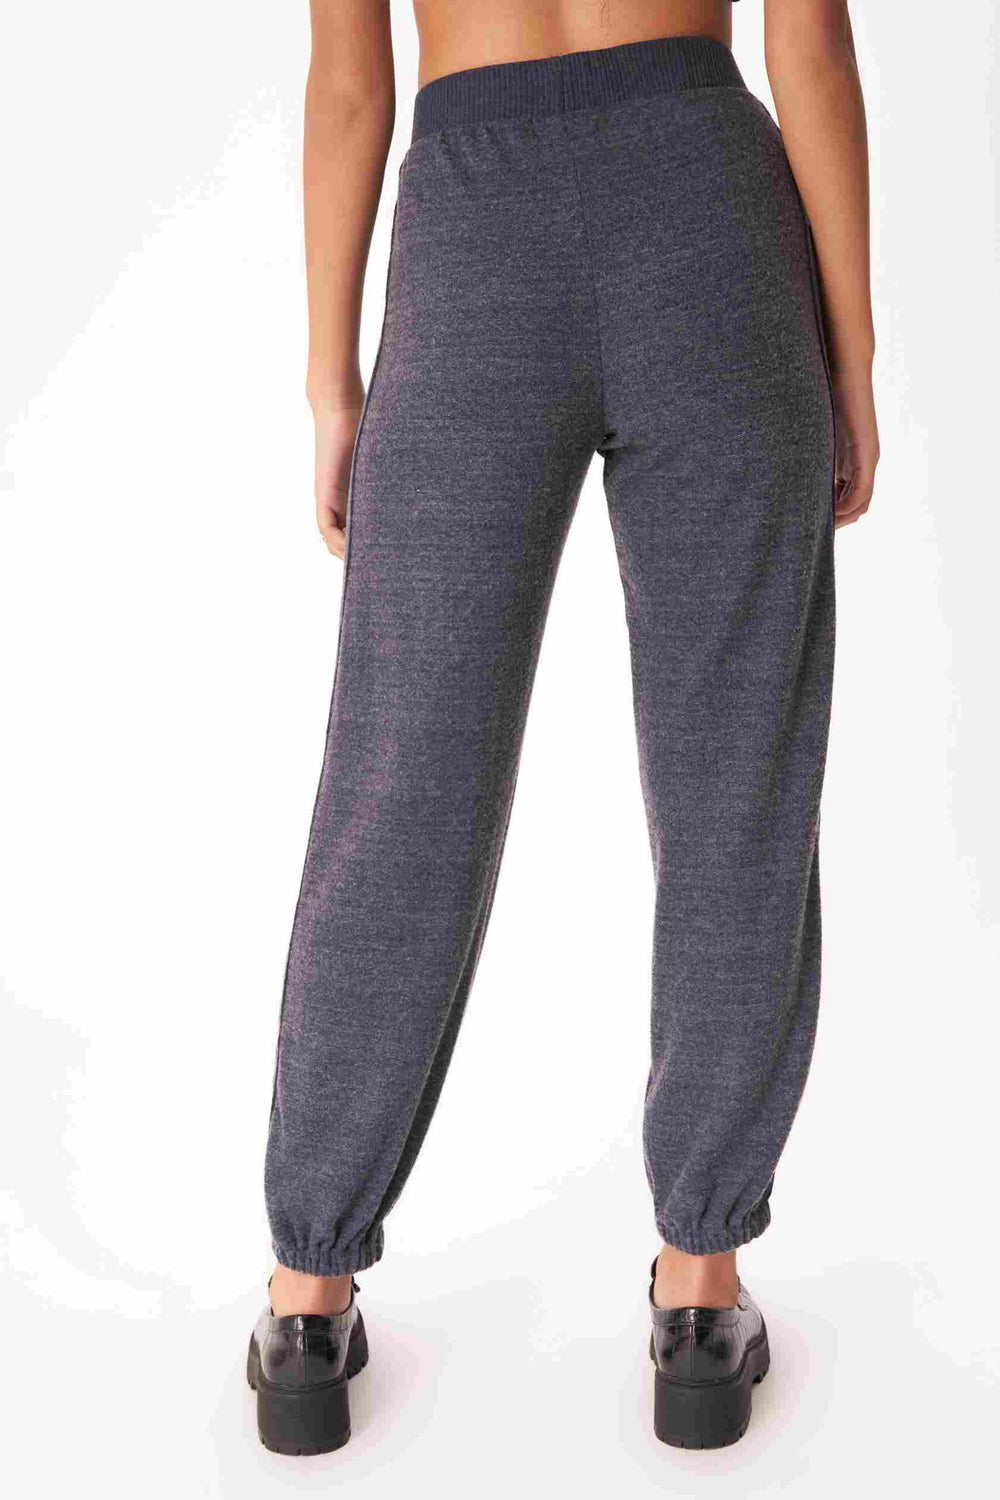 JUST RELAX COZY SEAMED JOGGER-H GALAXY BLUE - Kingfisher Road - Online Boutique